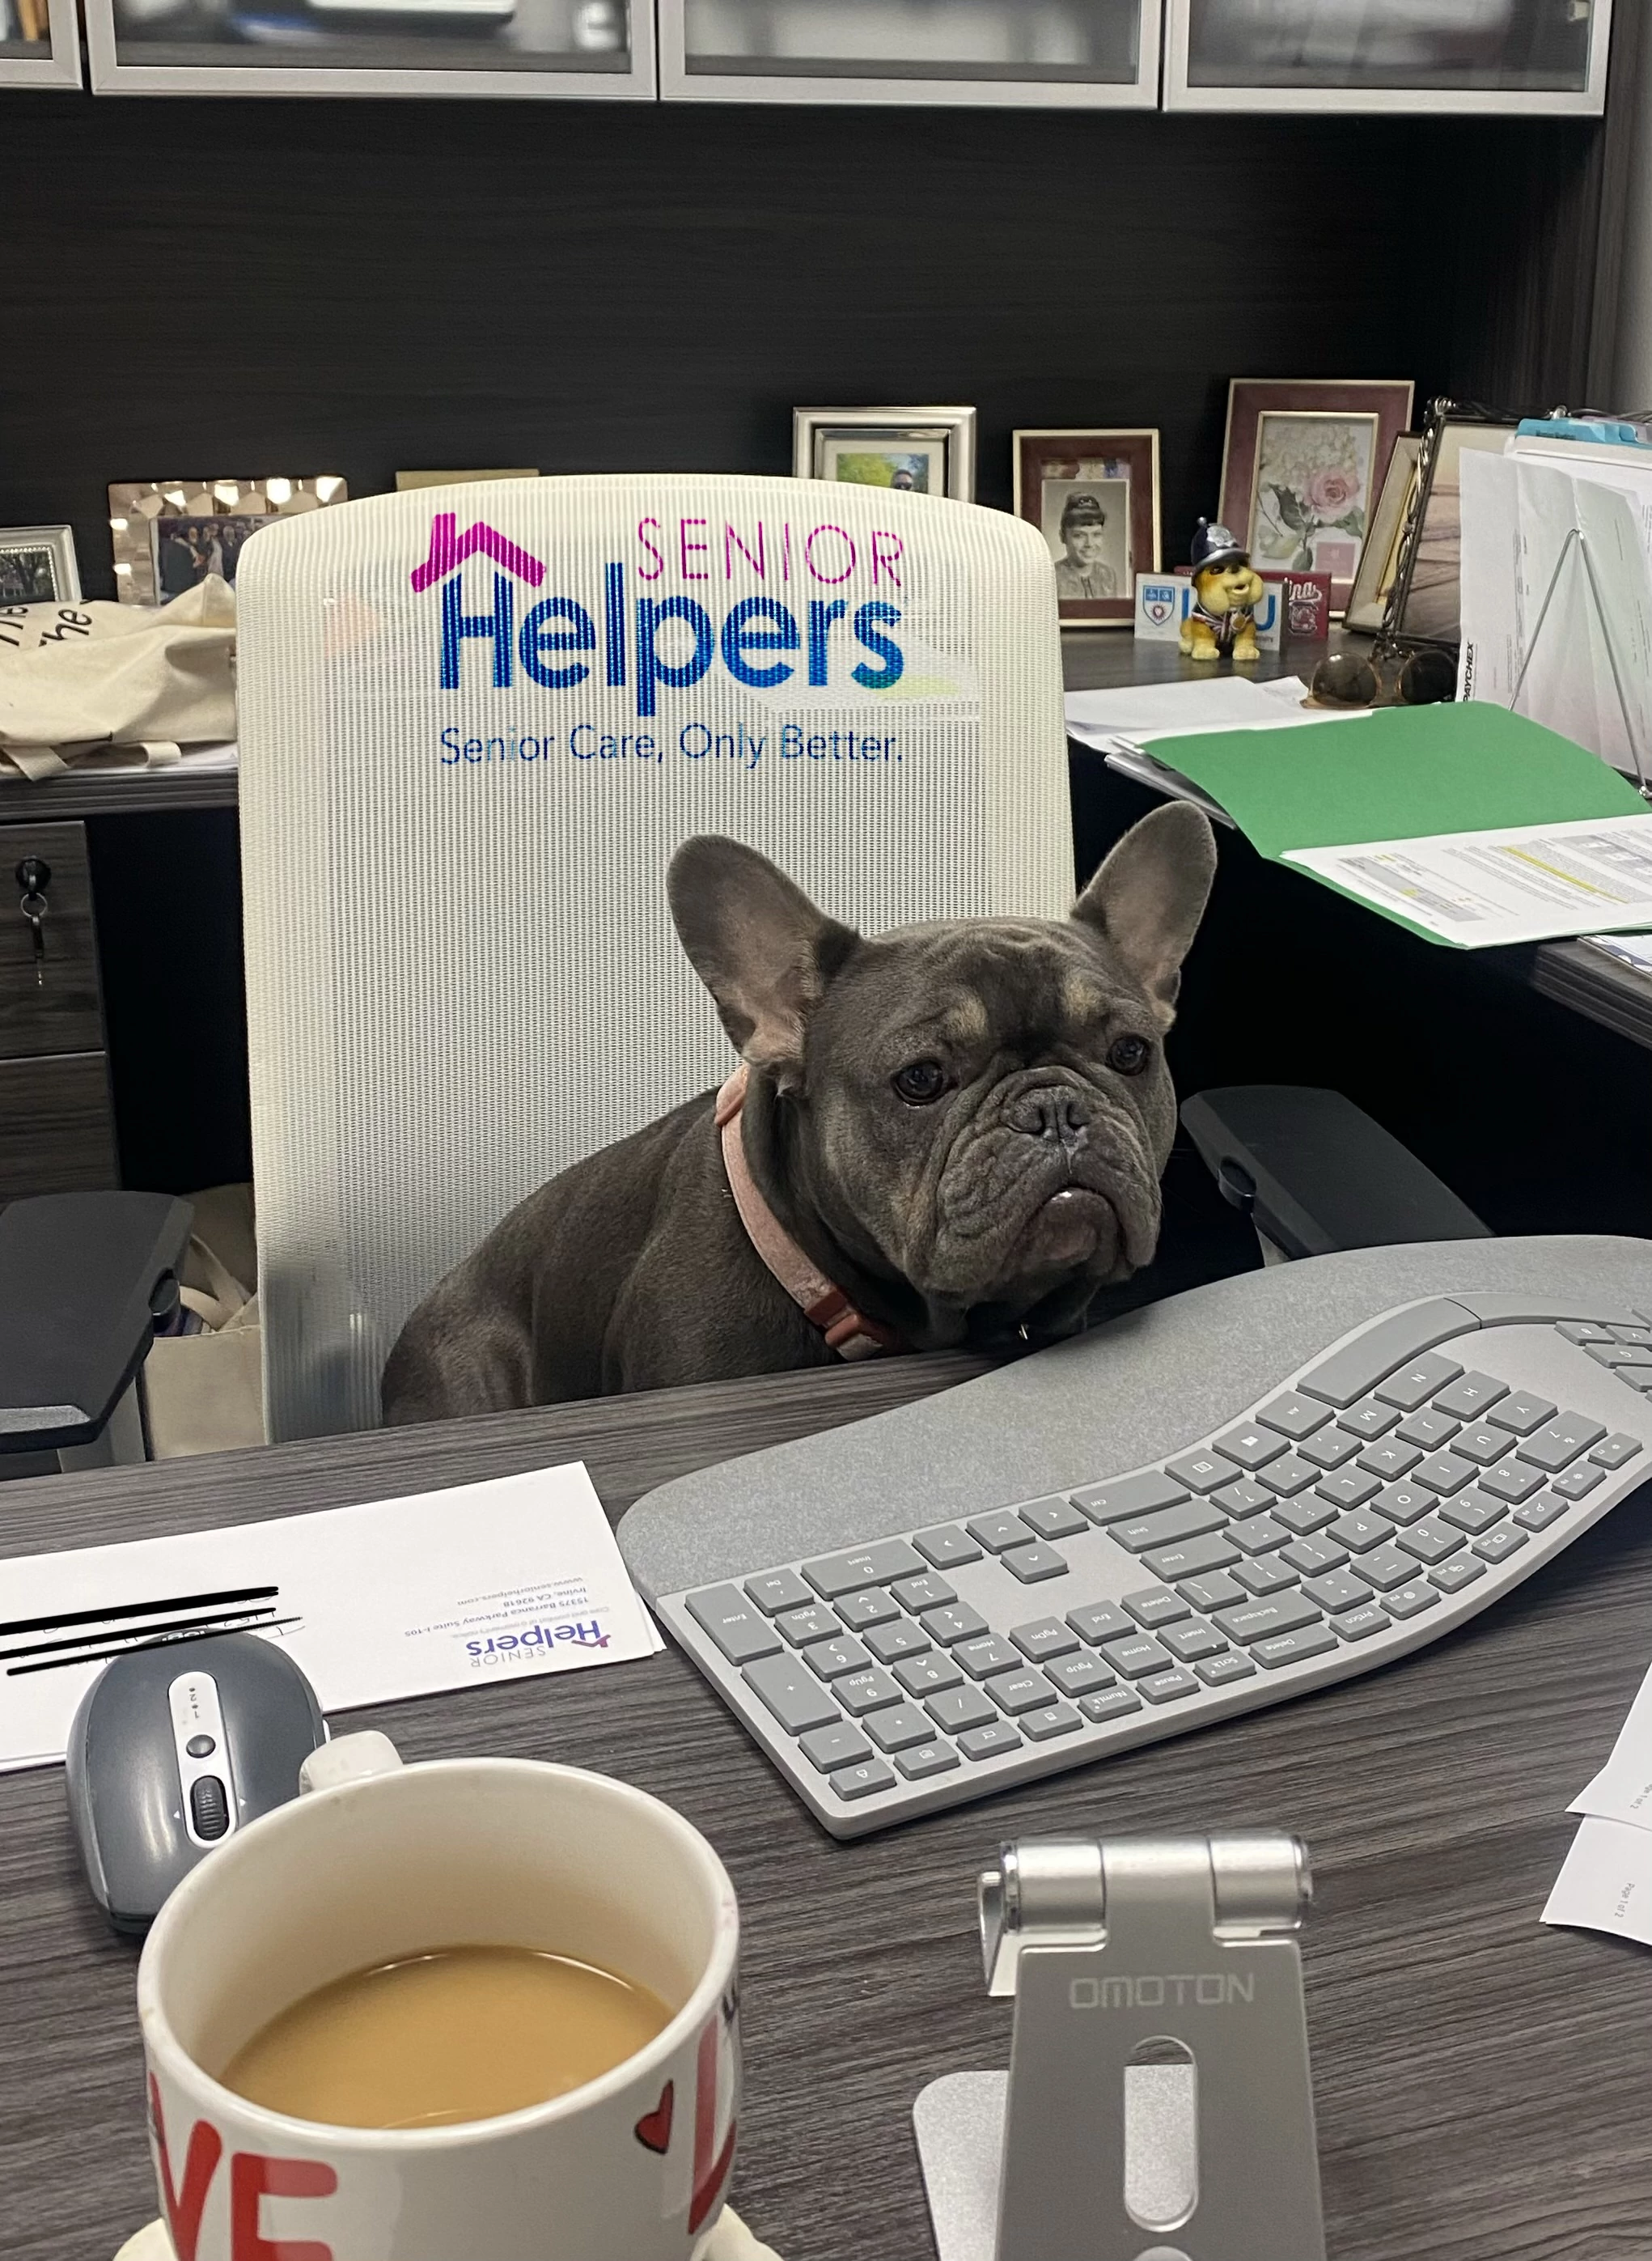 At Senior Helpers of South OC, we LOVE dogs. We believe they are an older adult’s best friend and bring much needed affection and engagement for our clients. We own a dog friendly office and always look forward to bringing in our fur babies. Meet Layla.